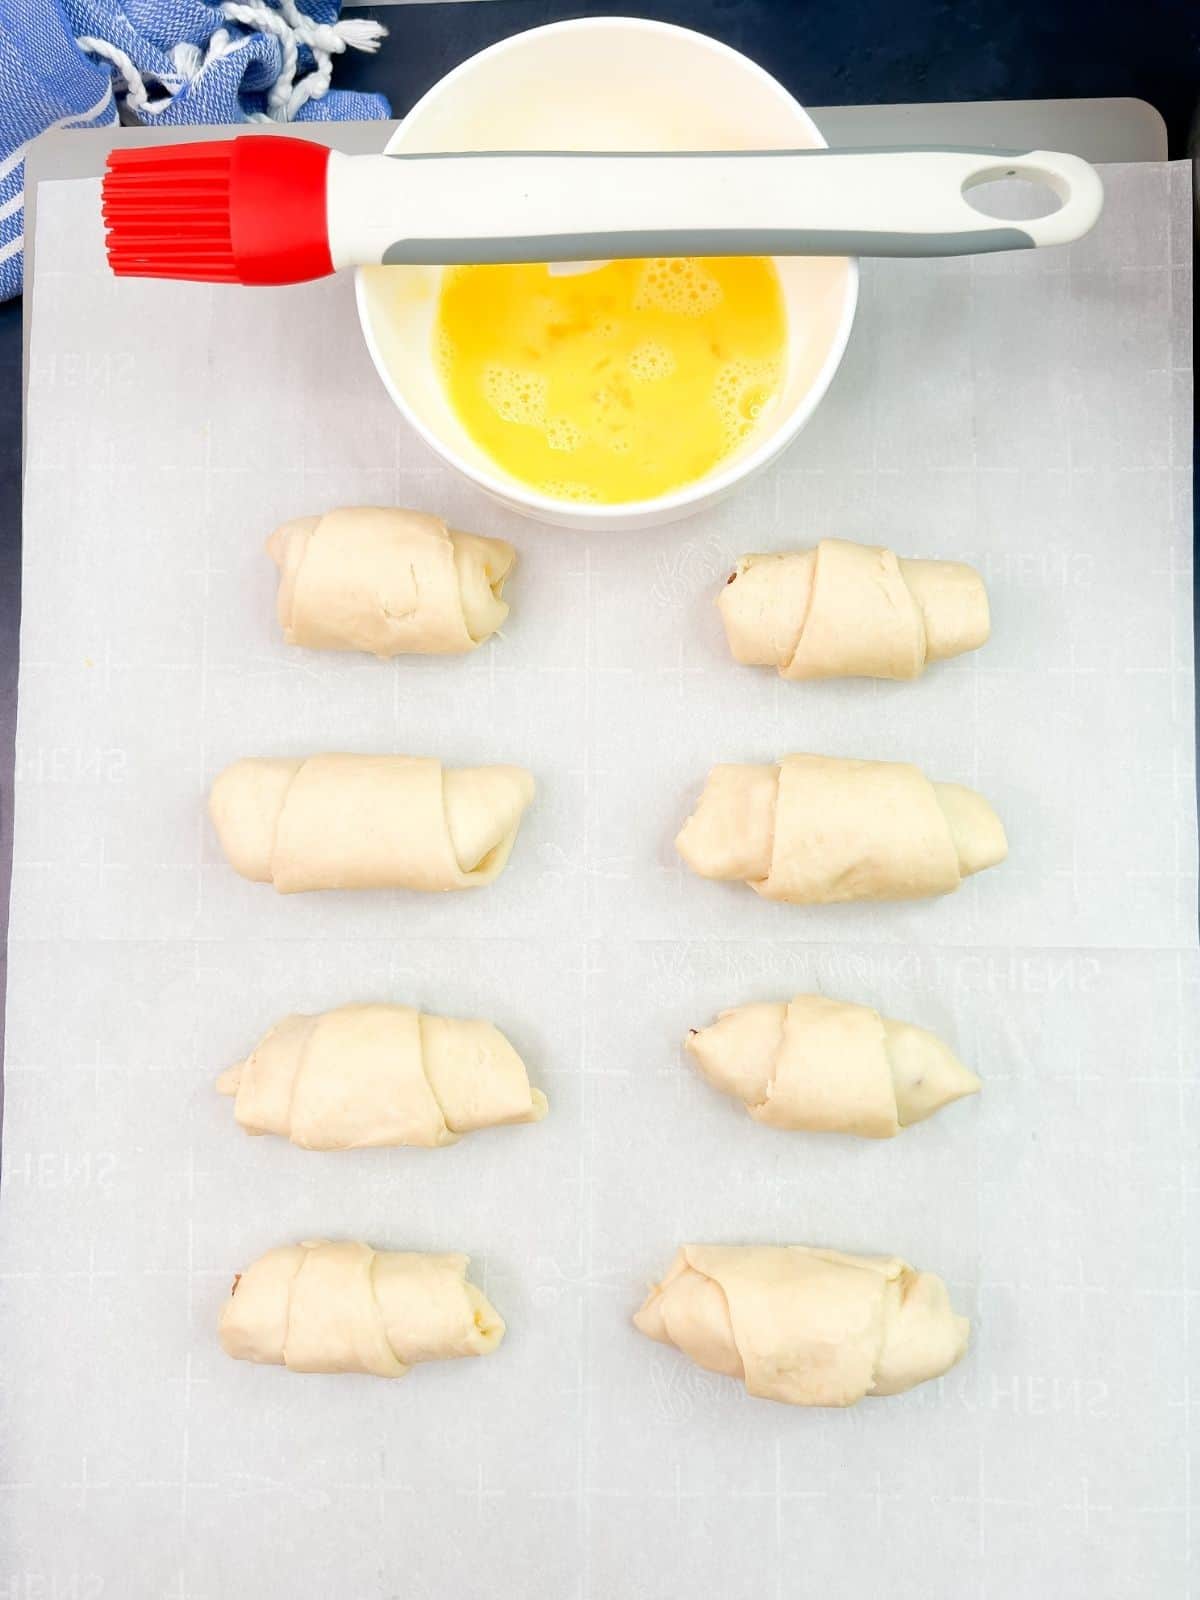 unbaked crescent rolls on baking tray with bowl of egg and silicone brush.